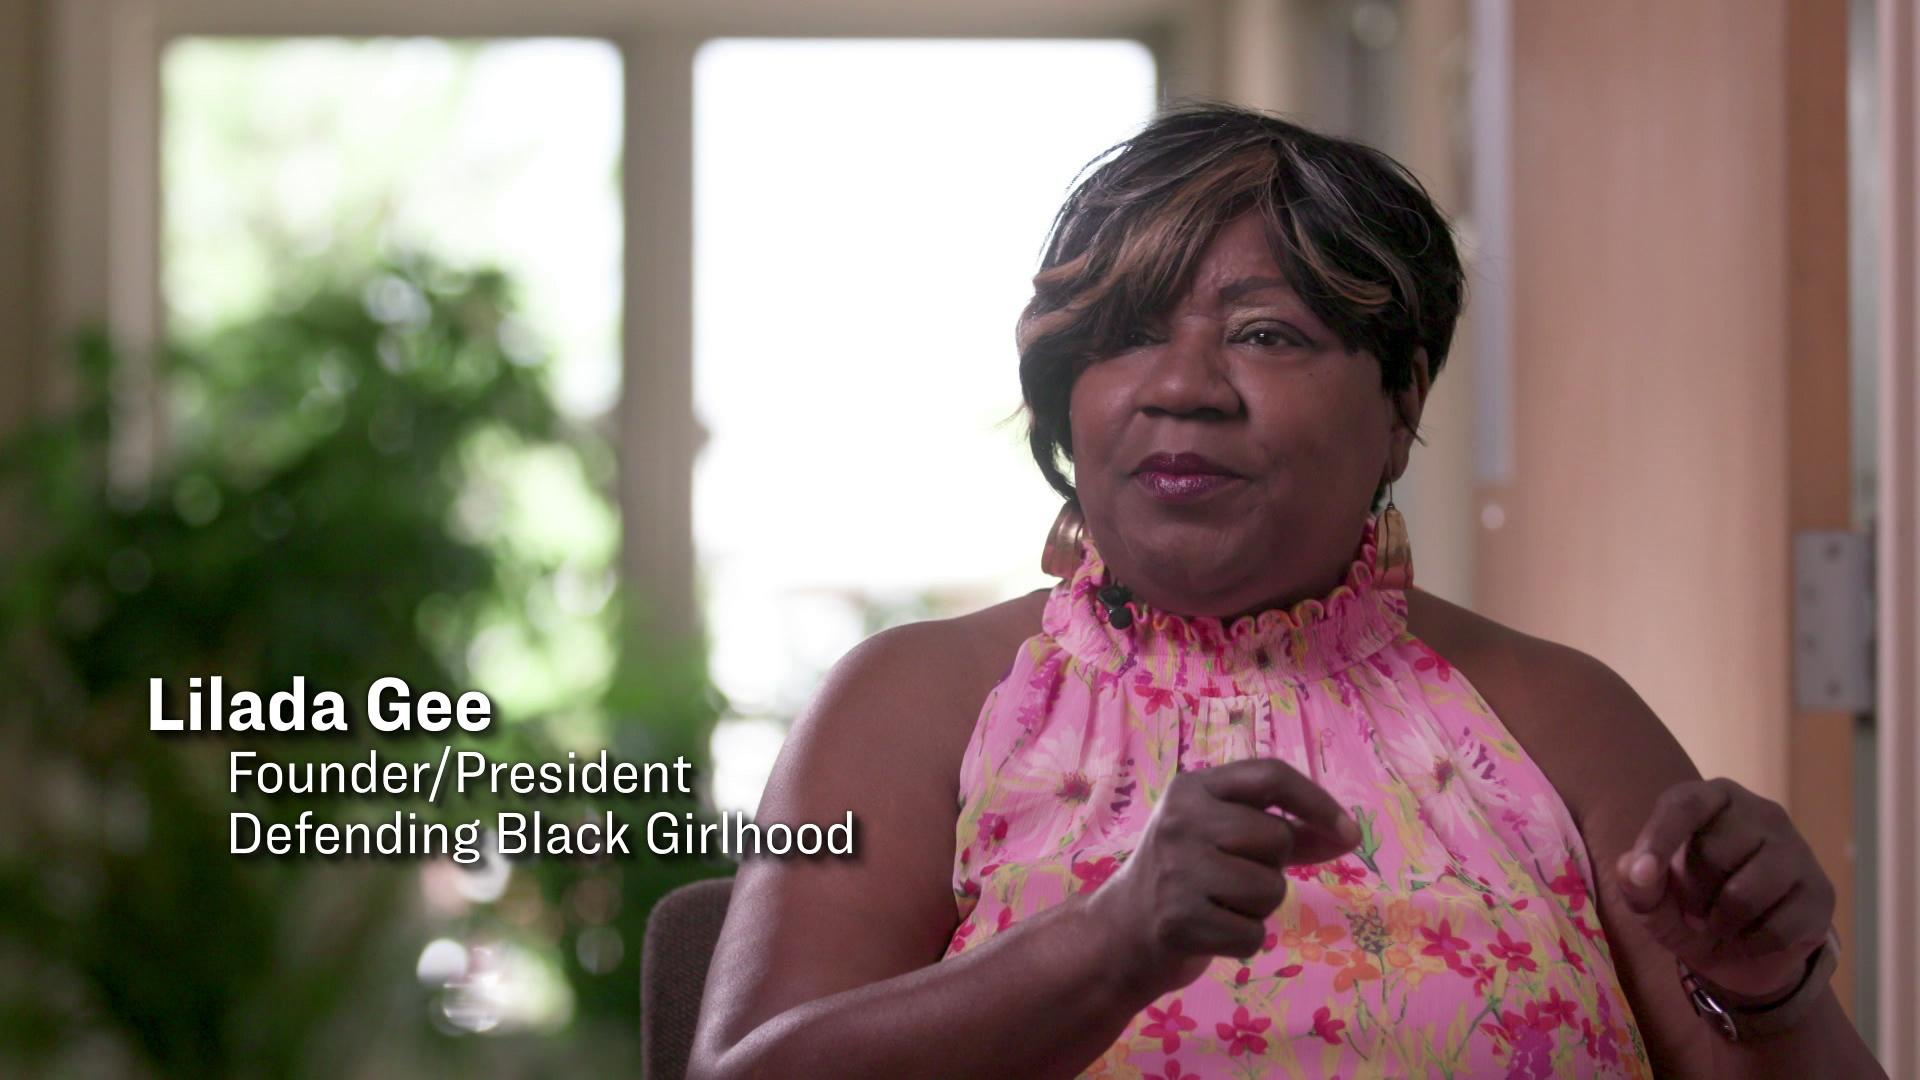 Lilada Gee on generational trauma and the Black experience